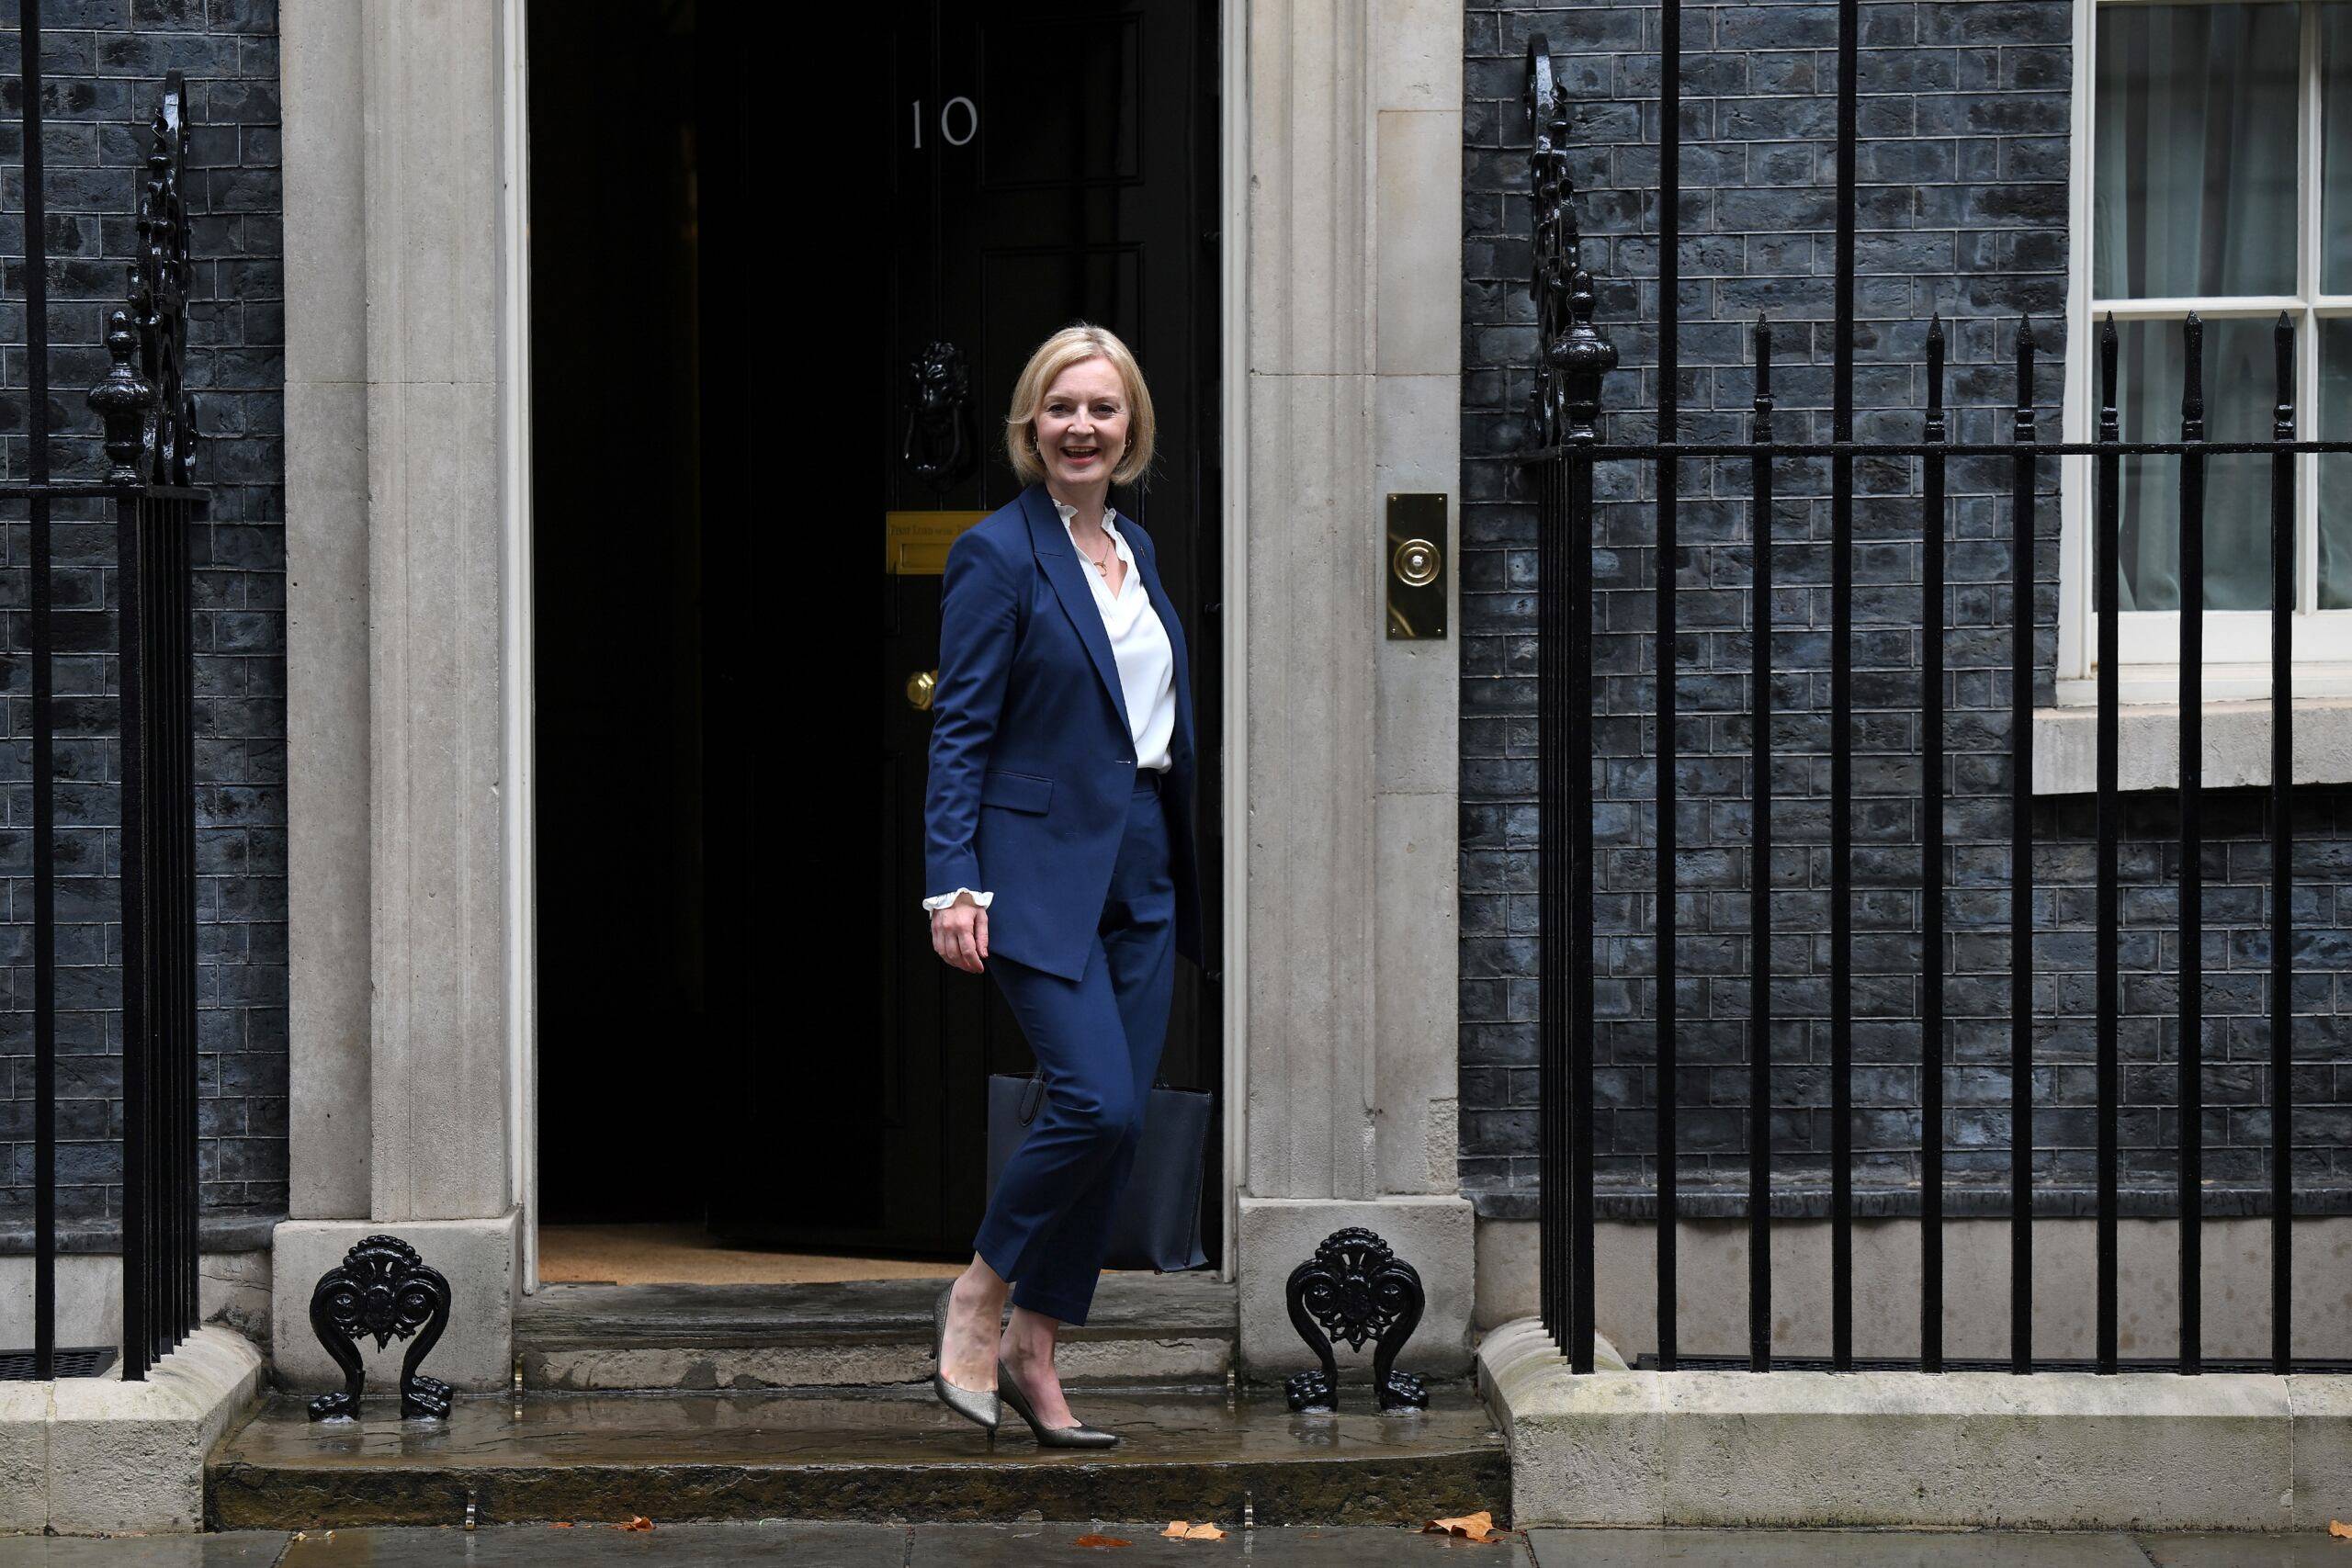 Britain's Prime Minister Liz Truss leaves from 10 Downing Street in central London on September 7, 2022, for the House of Commons to take part in her first Prime Minister's Questions (PMQs). - Britain's newly appointed Prime Minister Liz Truss unveiled her new top team as she formally took over from Boris Johnson, with no place for white men in any of the three senior-most cabinet posts for the first time ever. (Photo by Daniel LEAL / AFP)